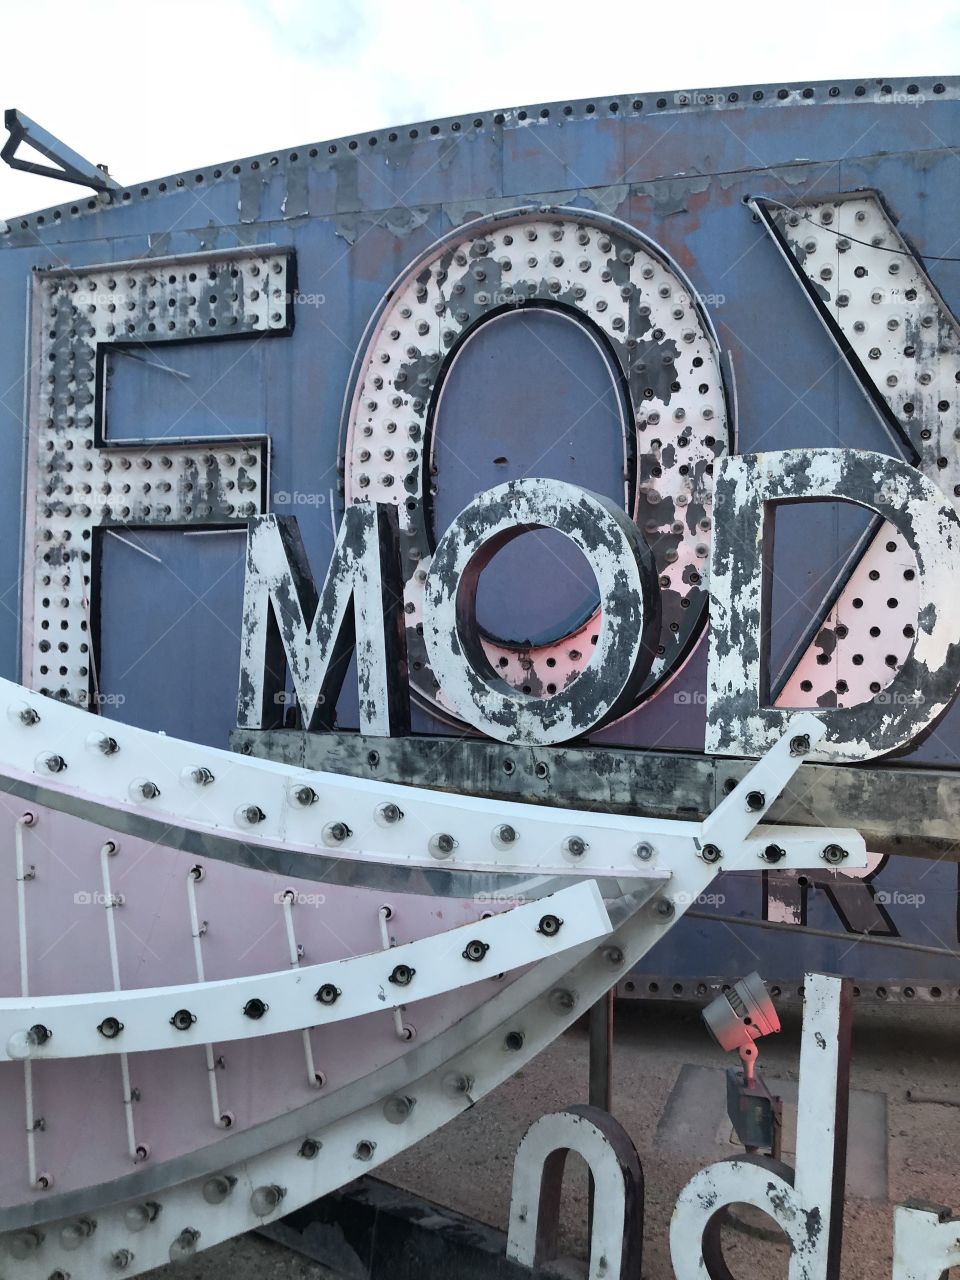 More from the Neon Museum. Las Vegas. 